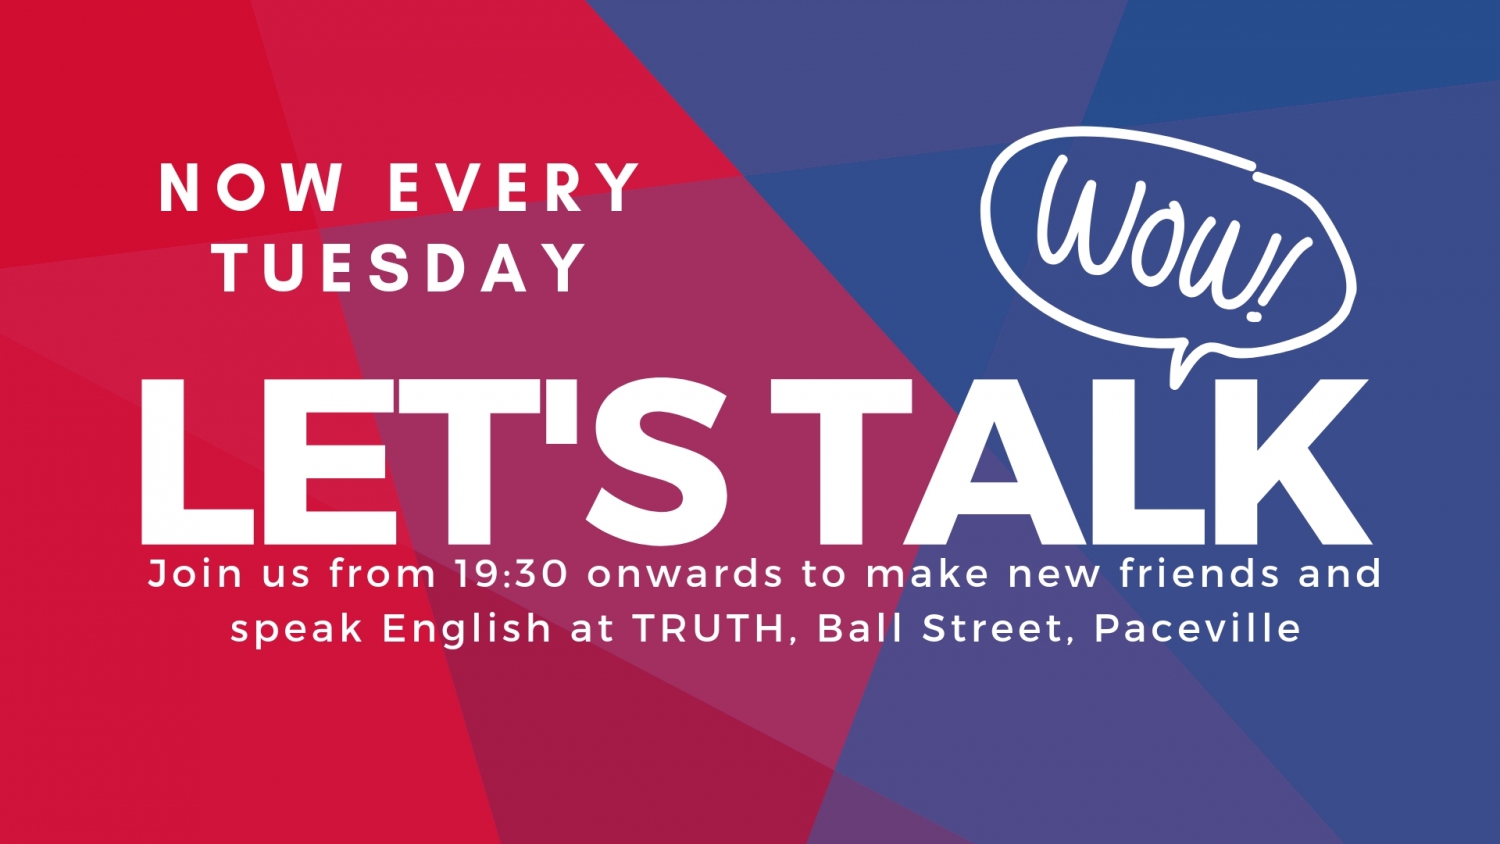 Make new friends, learn about Malta and improve your English